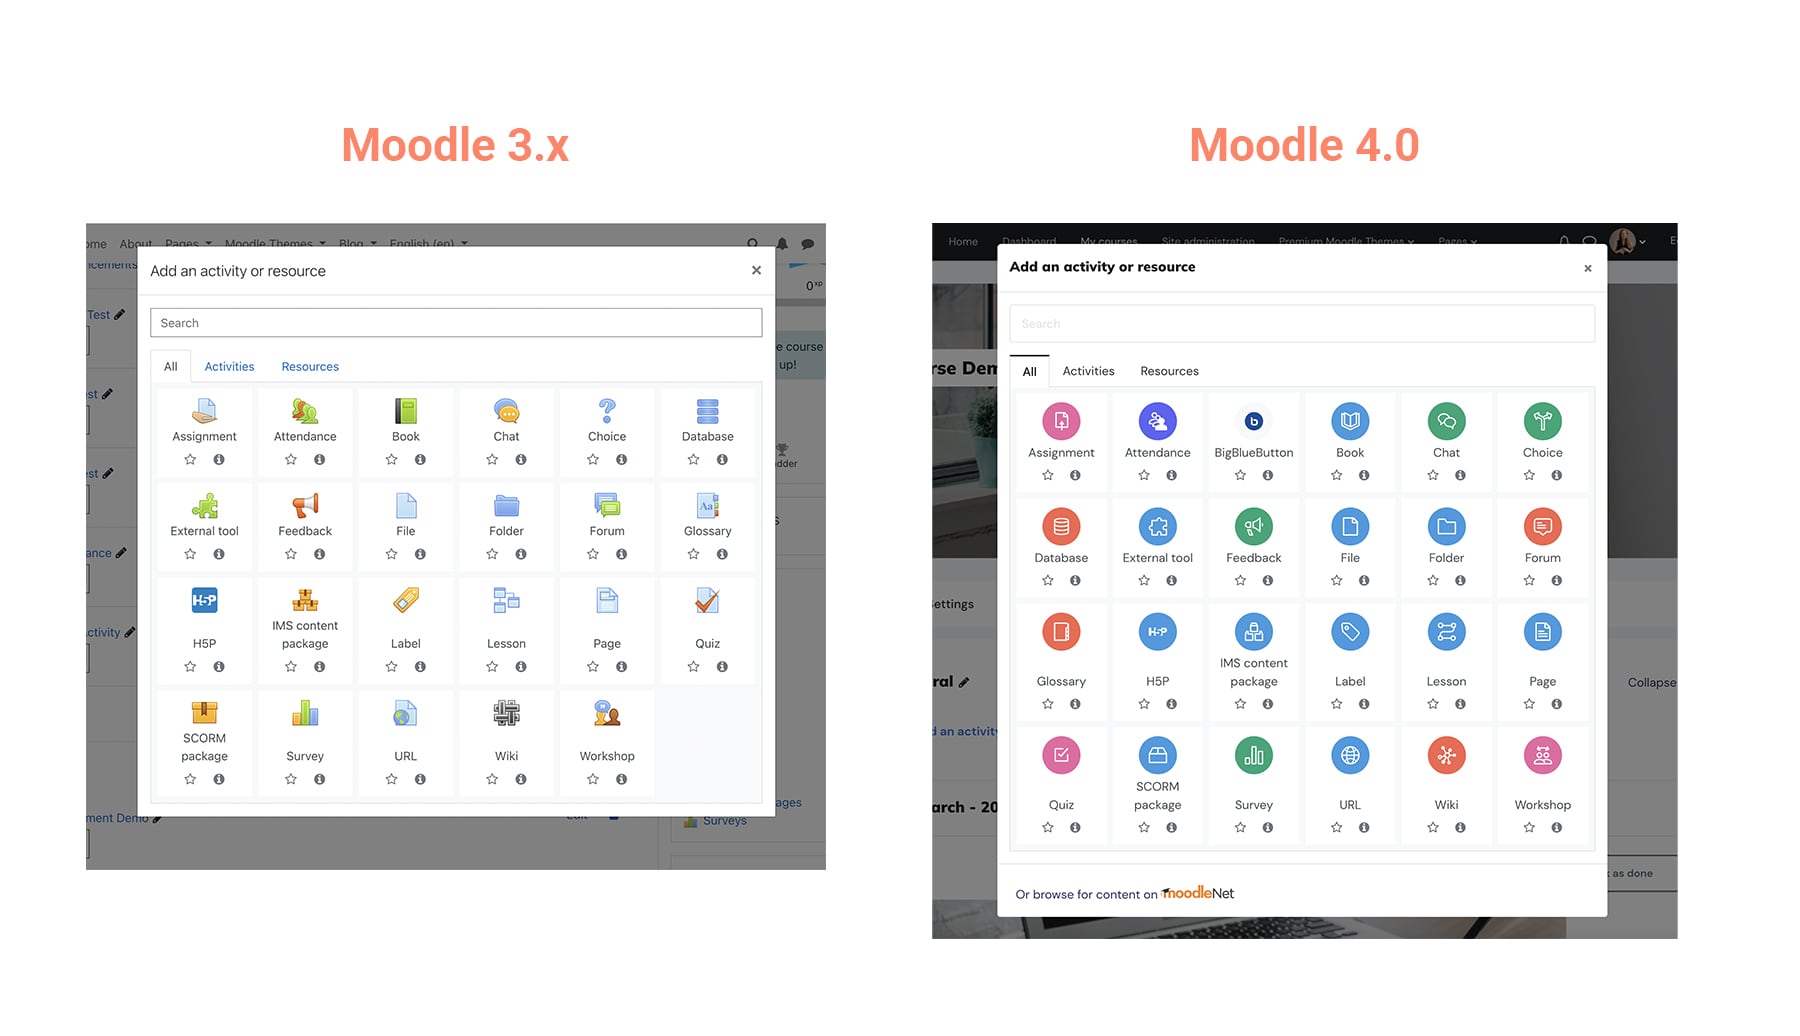 whats-new-in-moodle-4-new-icons-compare